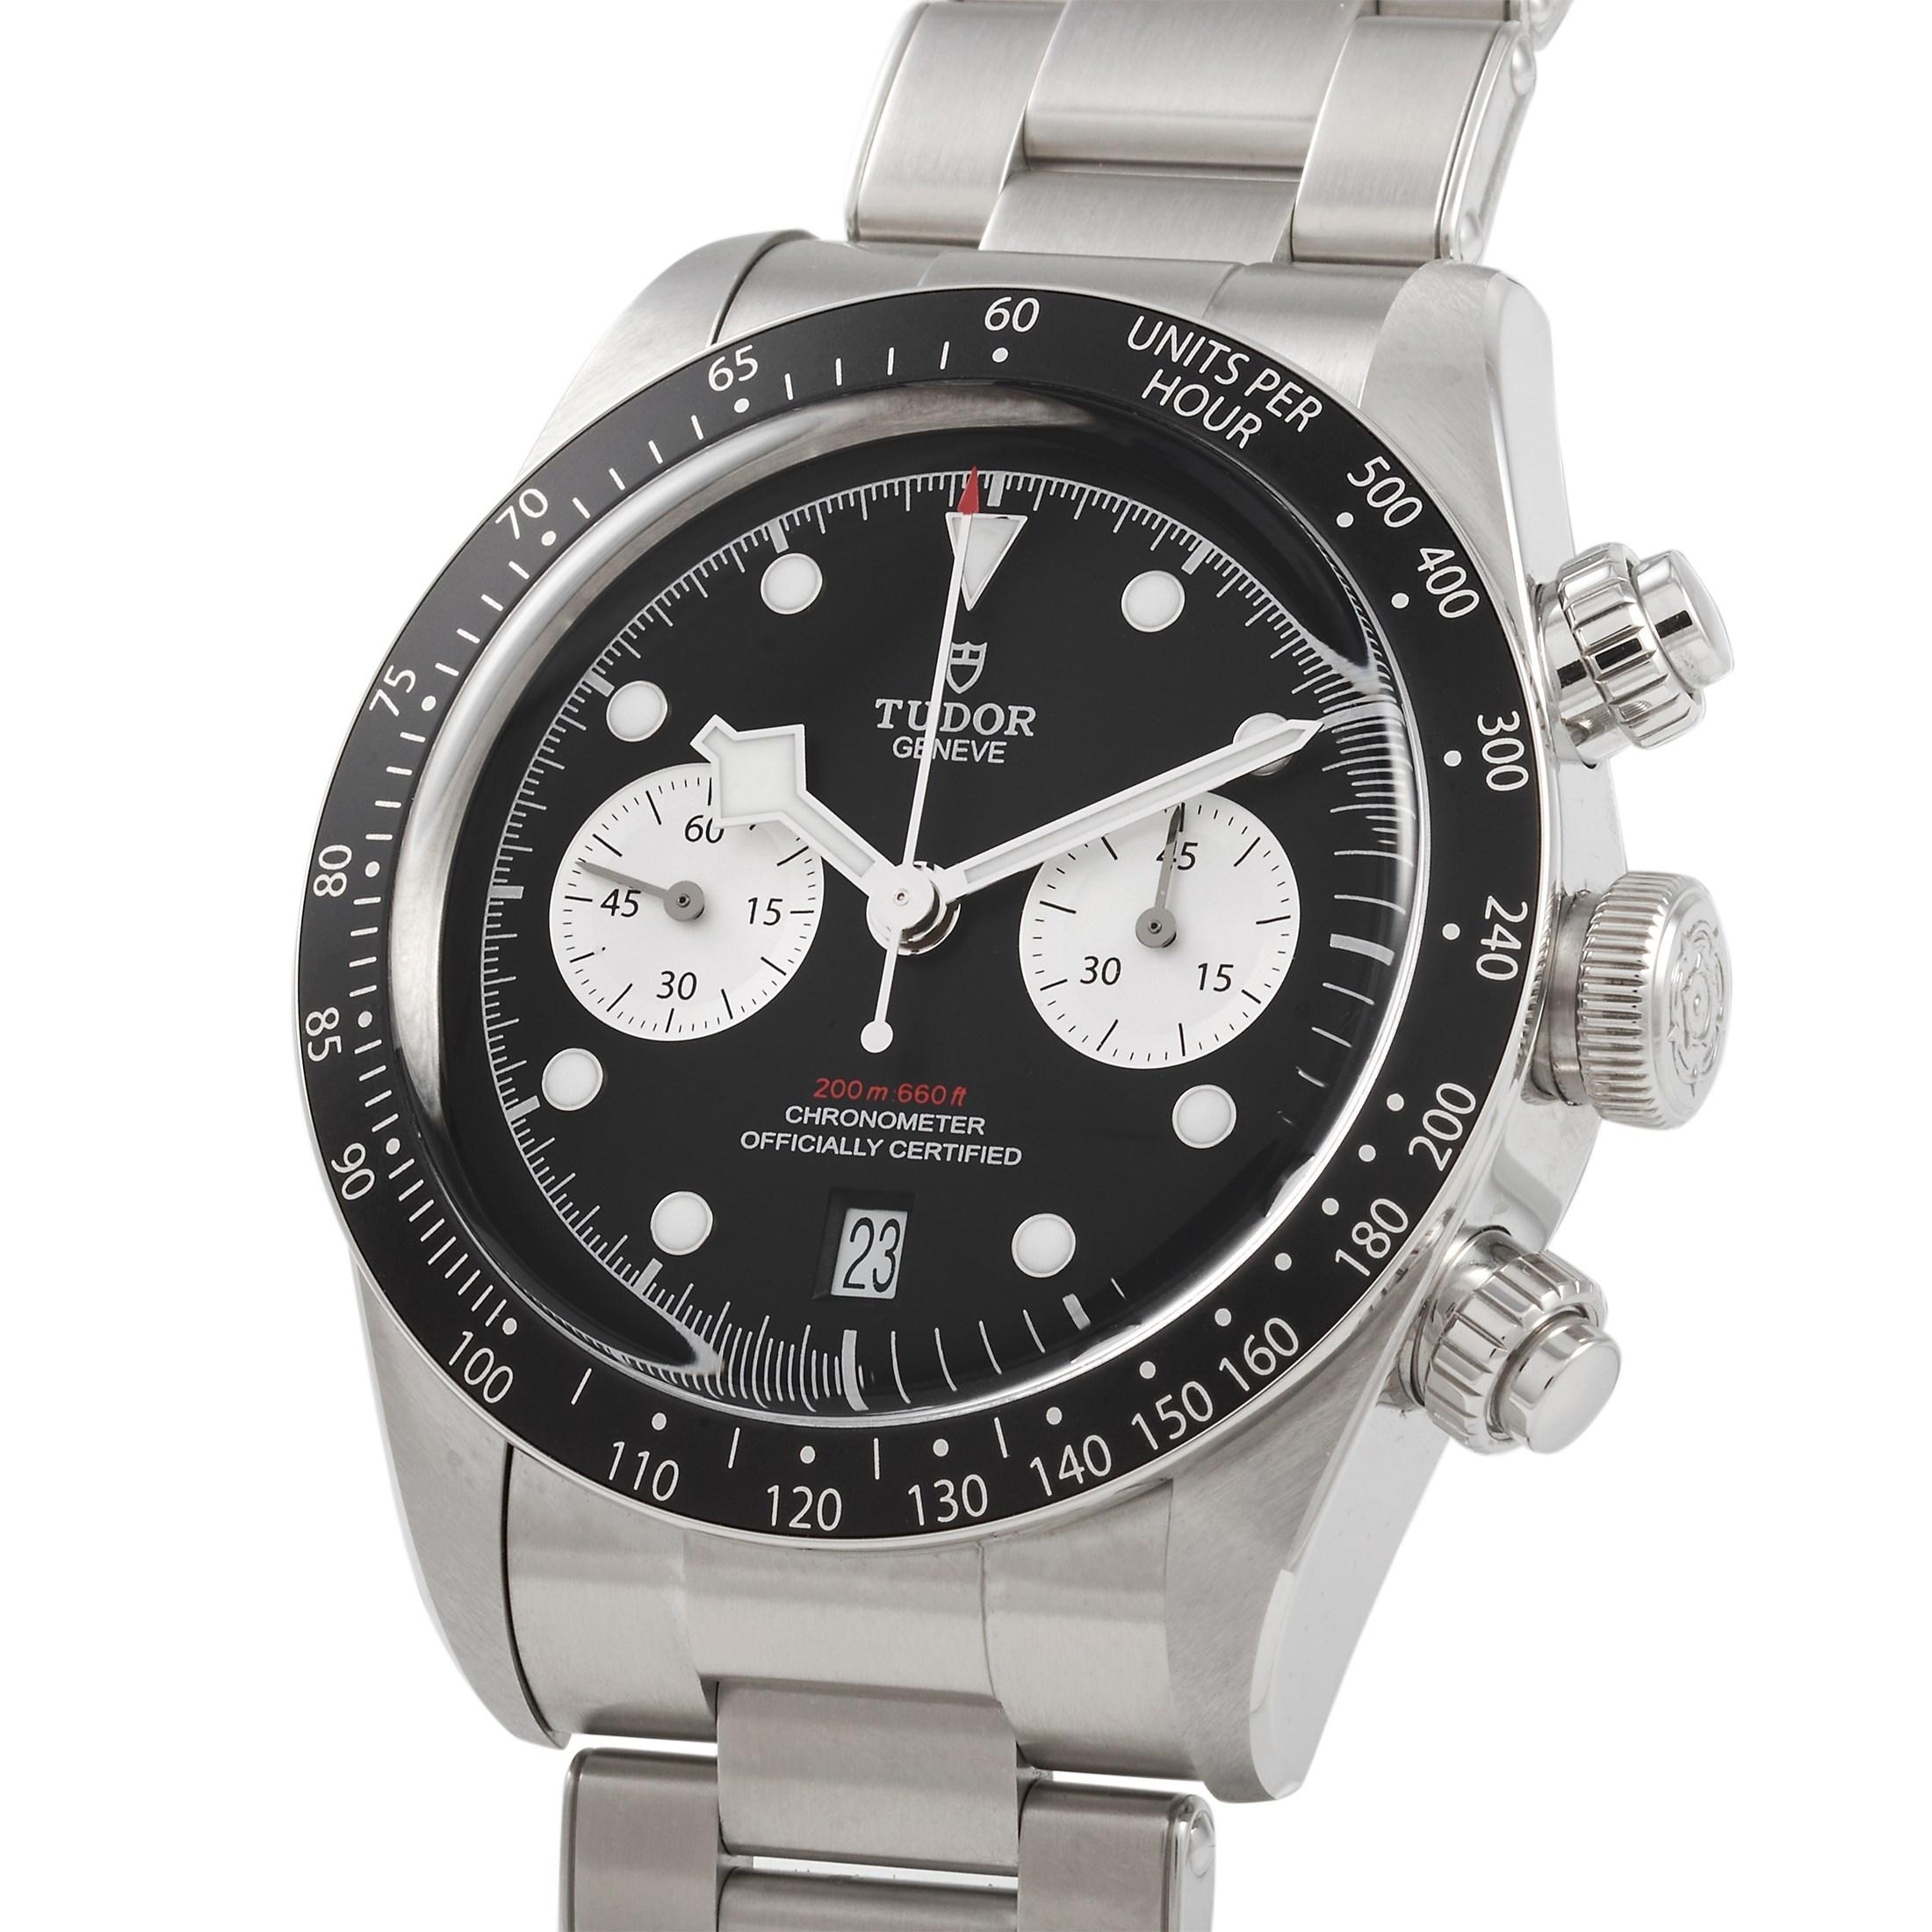 Classy and stylish, with the perfect visual depth and really good legibility, the Tudor Black Bay Chronograph Watch 79360N-001 offers you the experience of a vintage sports watch packaged in a modern timepiece. This watch features 41-mm wide, 14mm